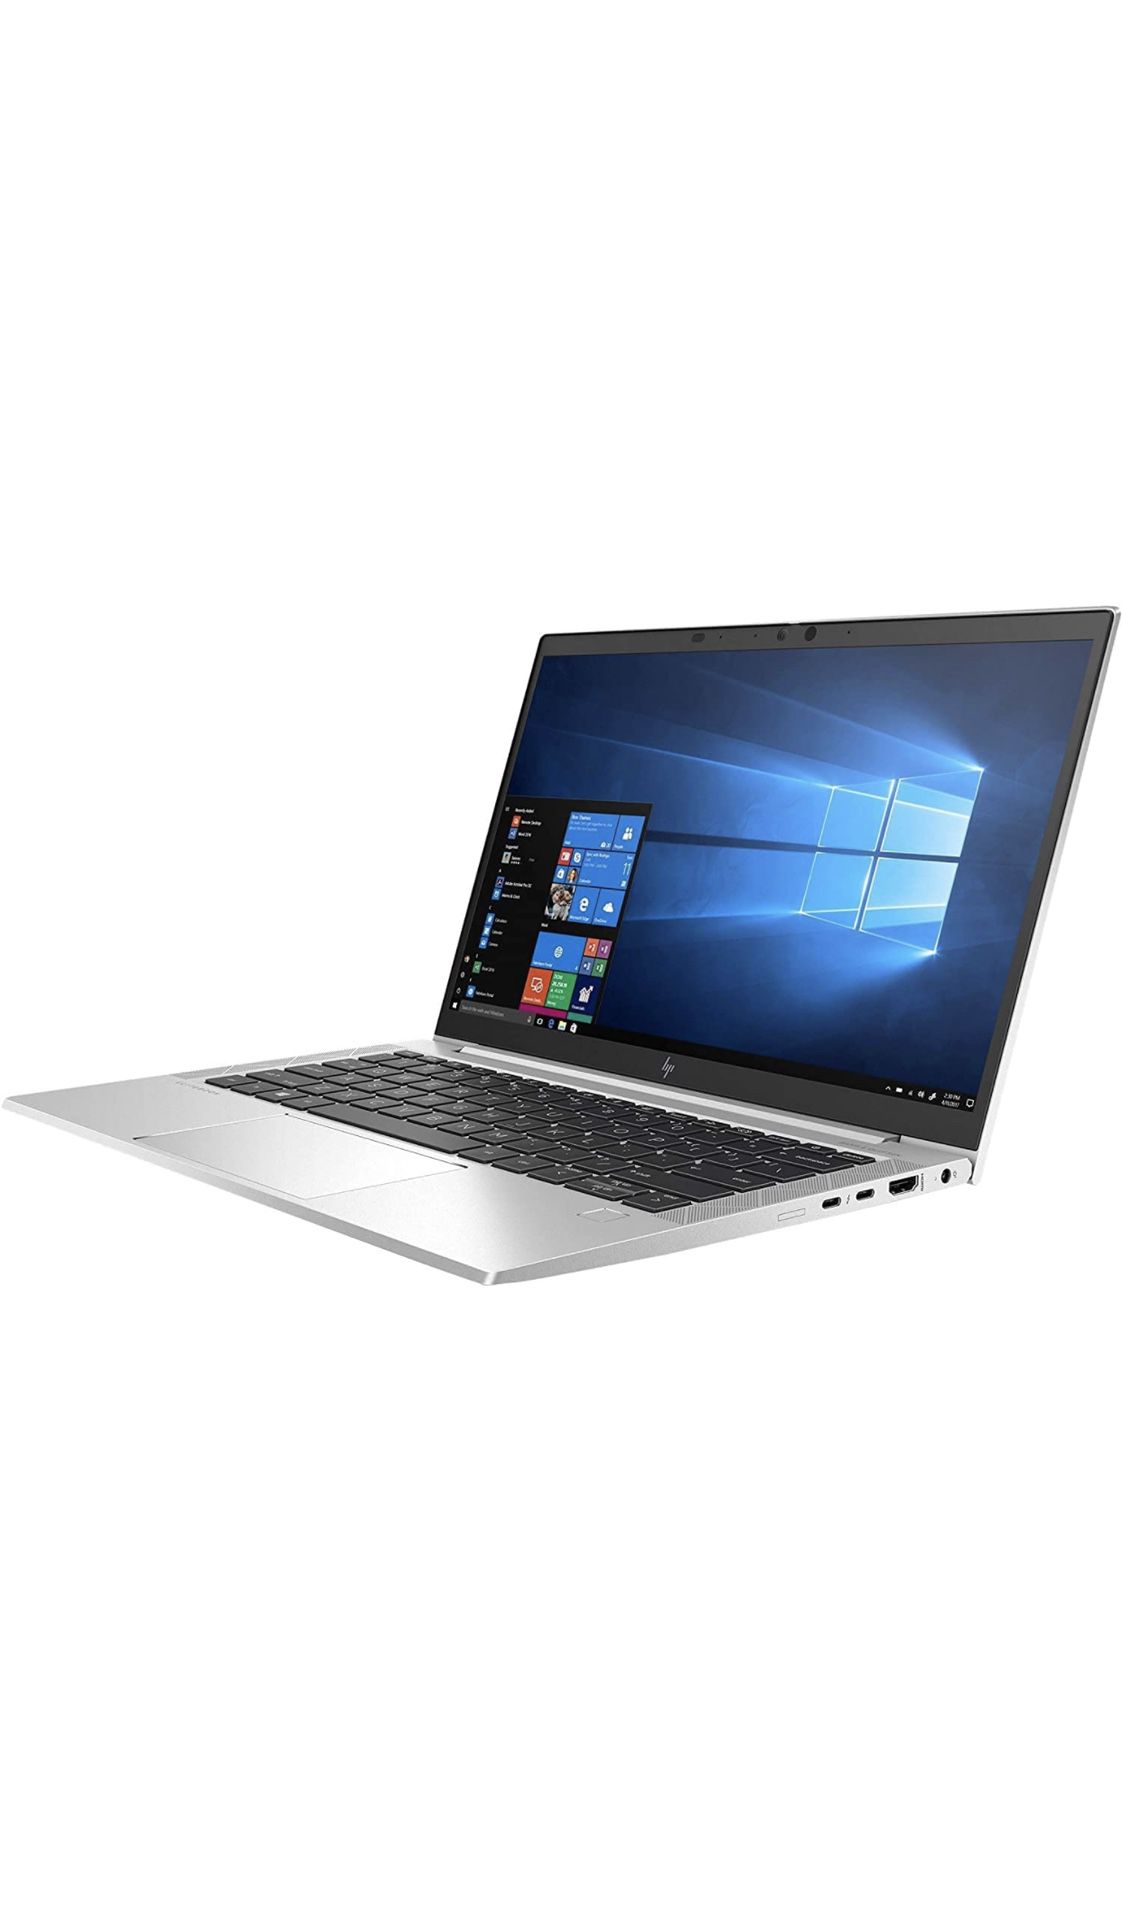 11th Generation Hp Elite Book 830 G8 Latest Laptop With The Best Technology